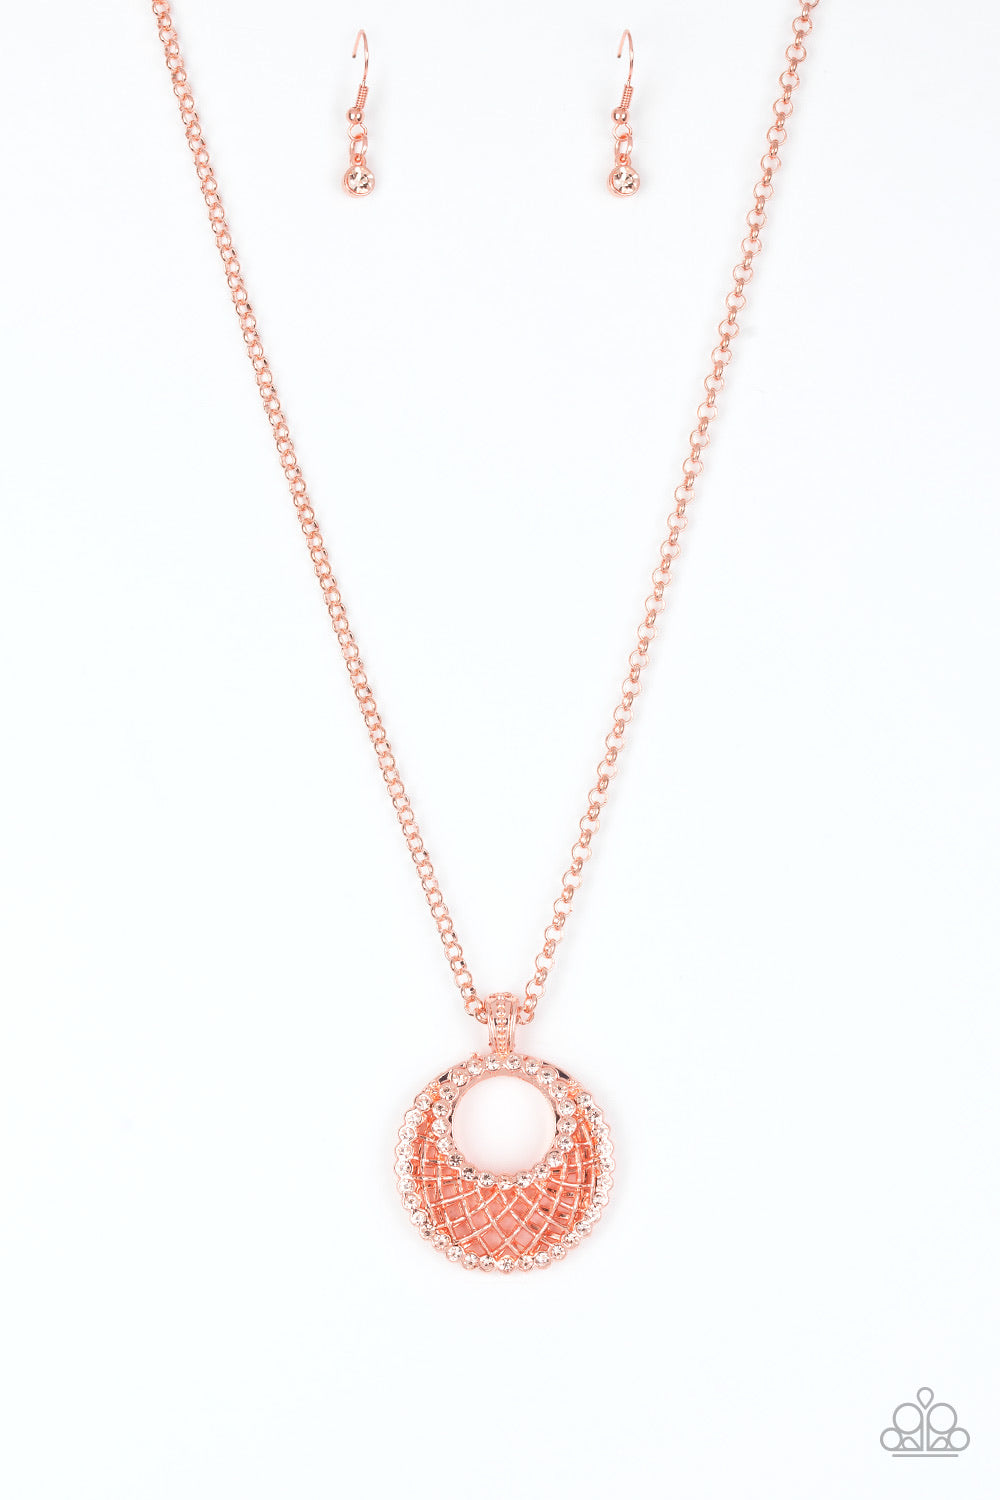 Net Worth Necklace - Copper